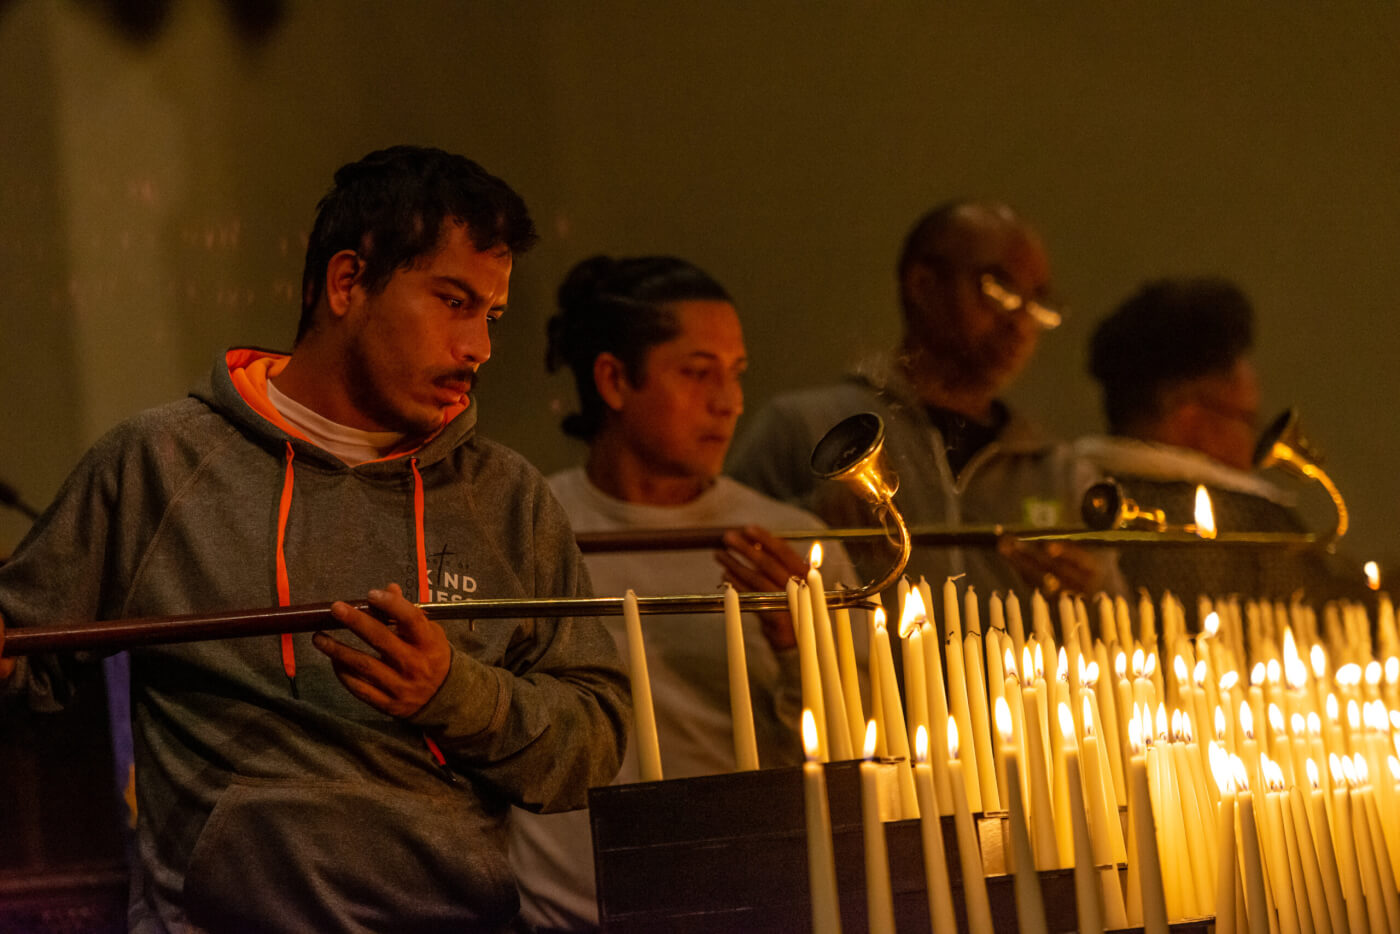 Img: People lighting rows of candles in a church